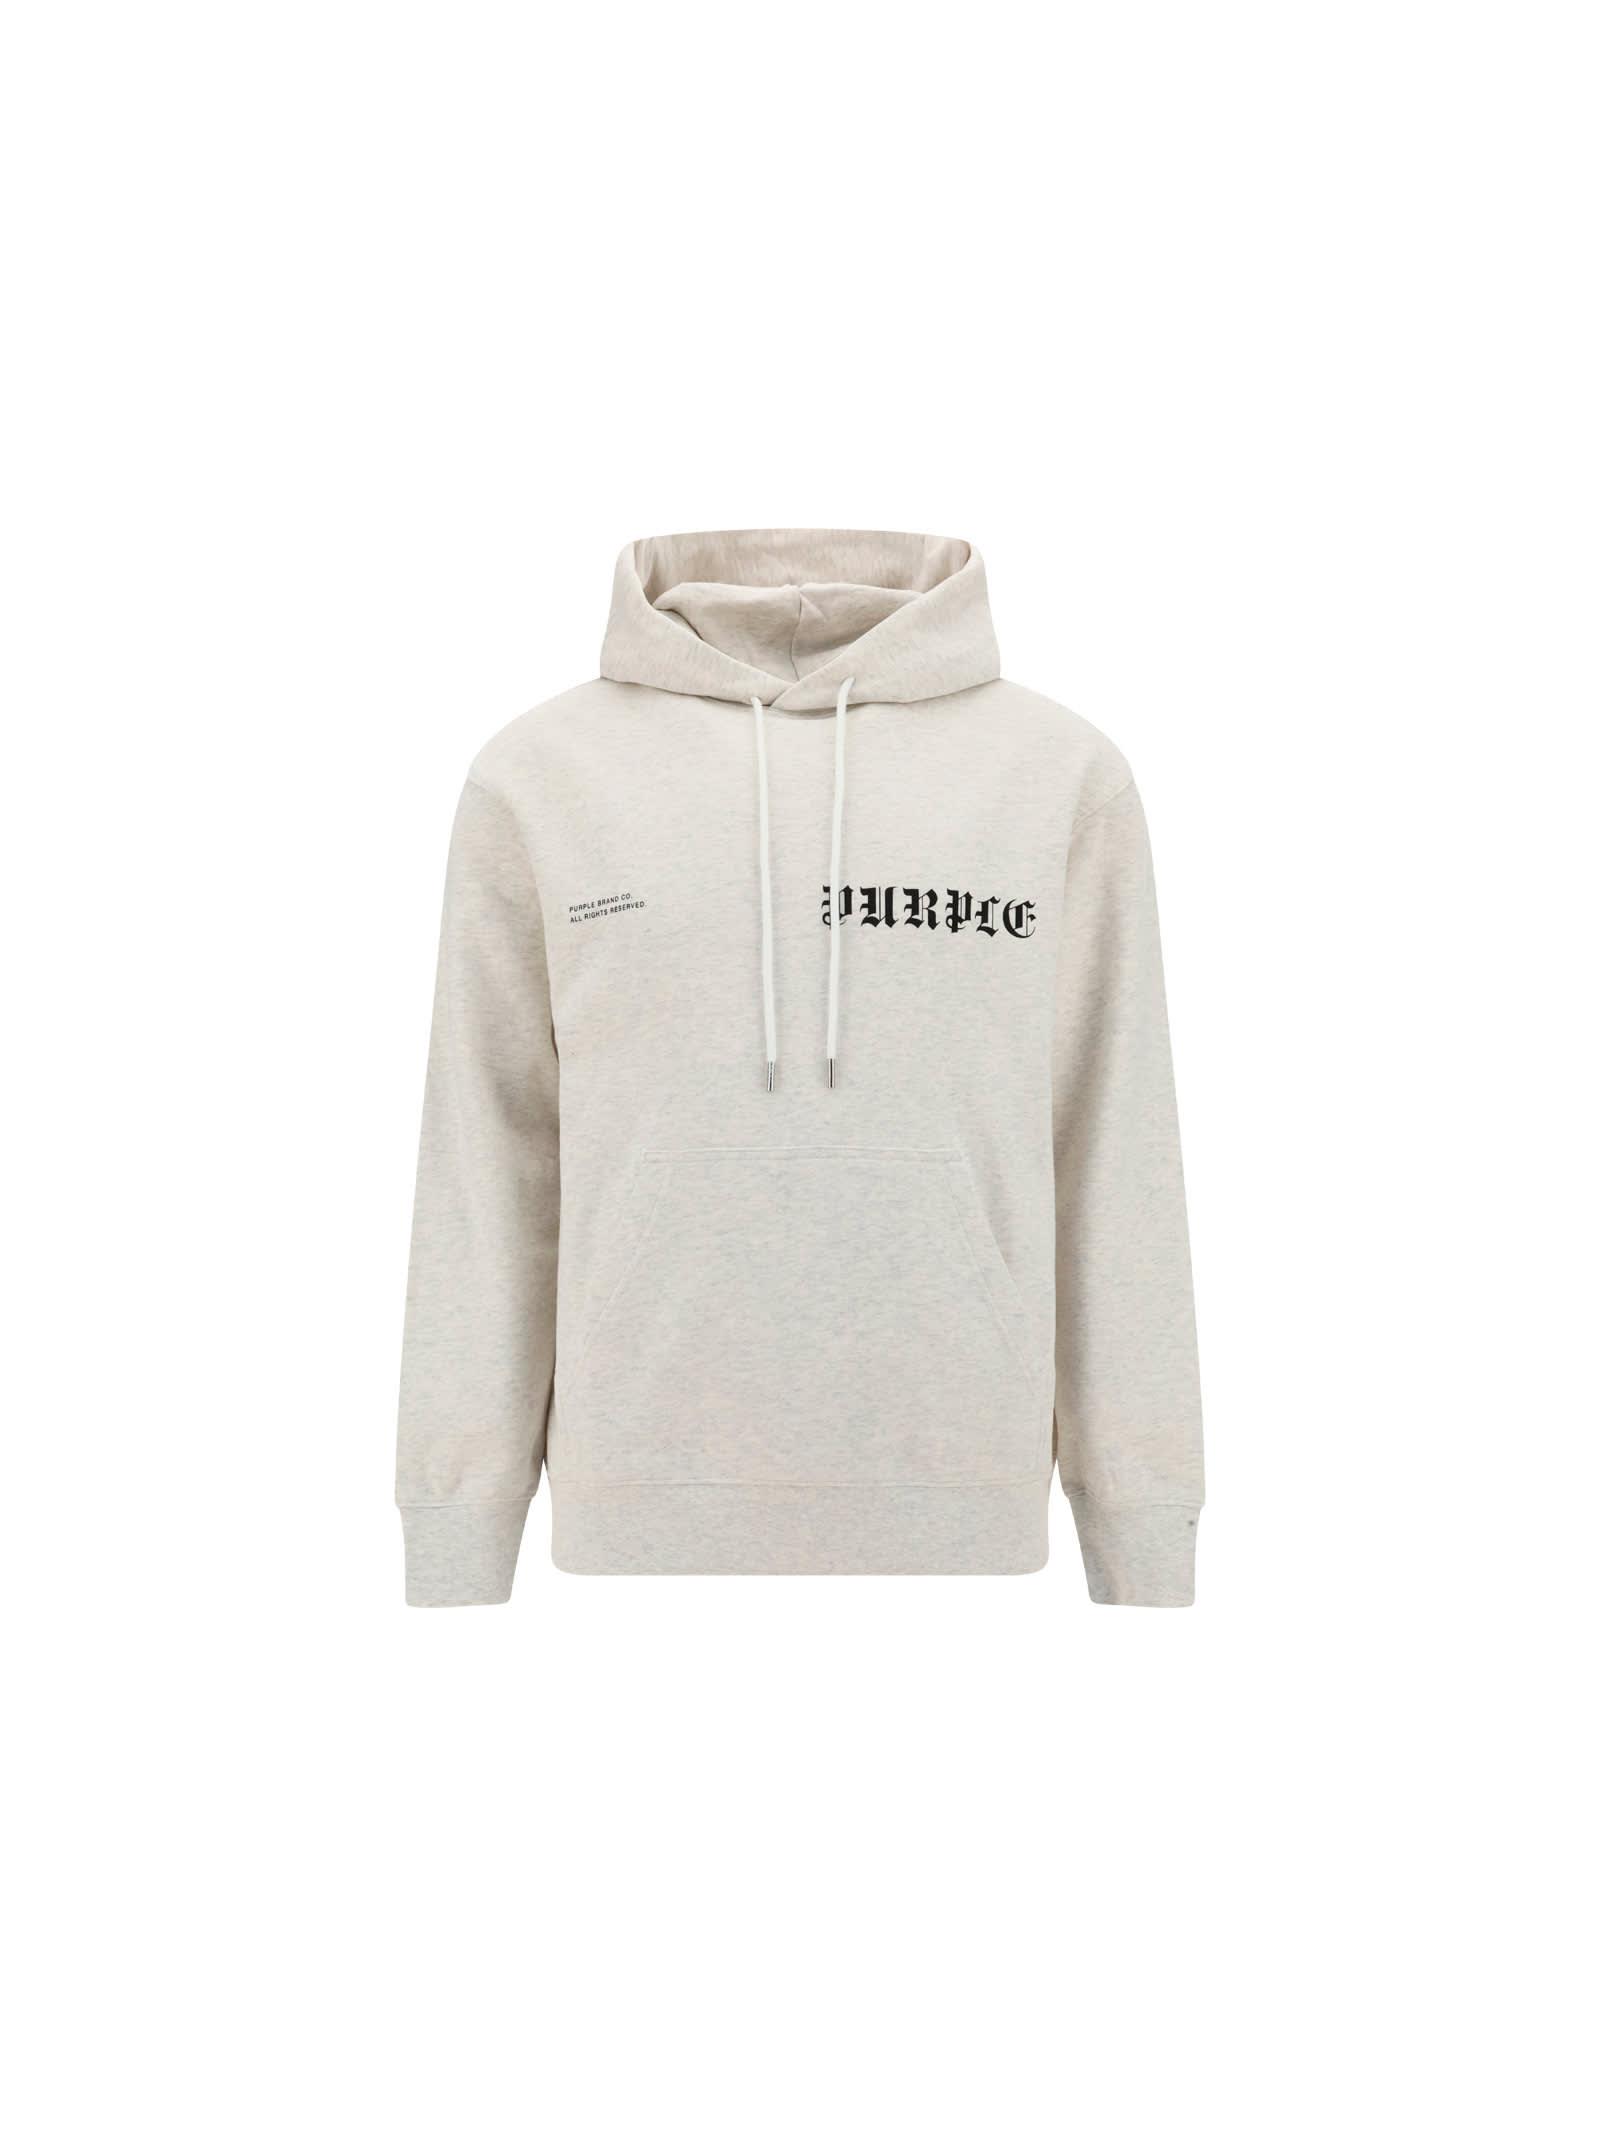 Purple Brand Hoodie in White for Men